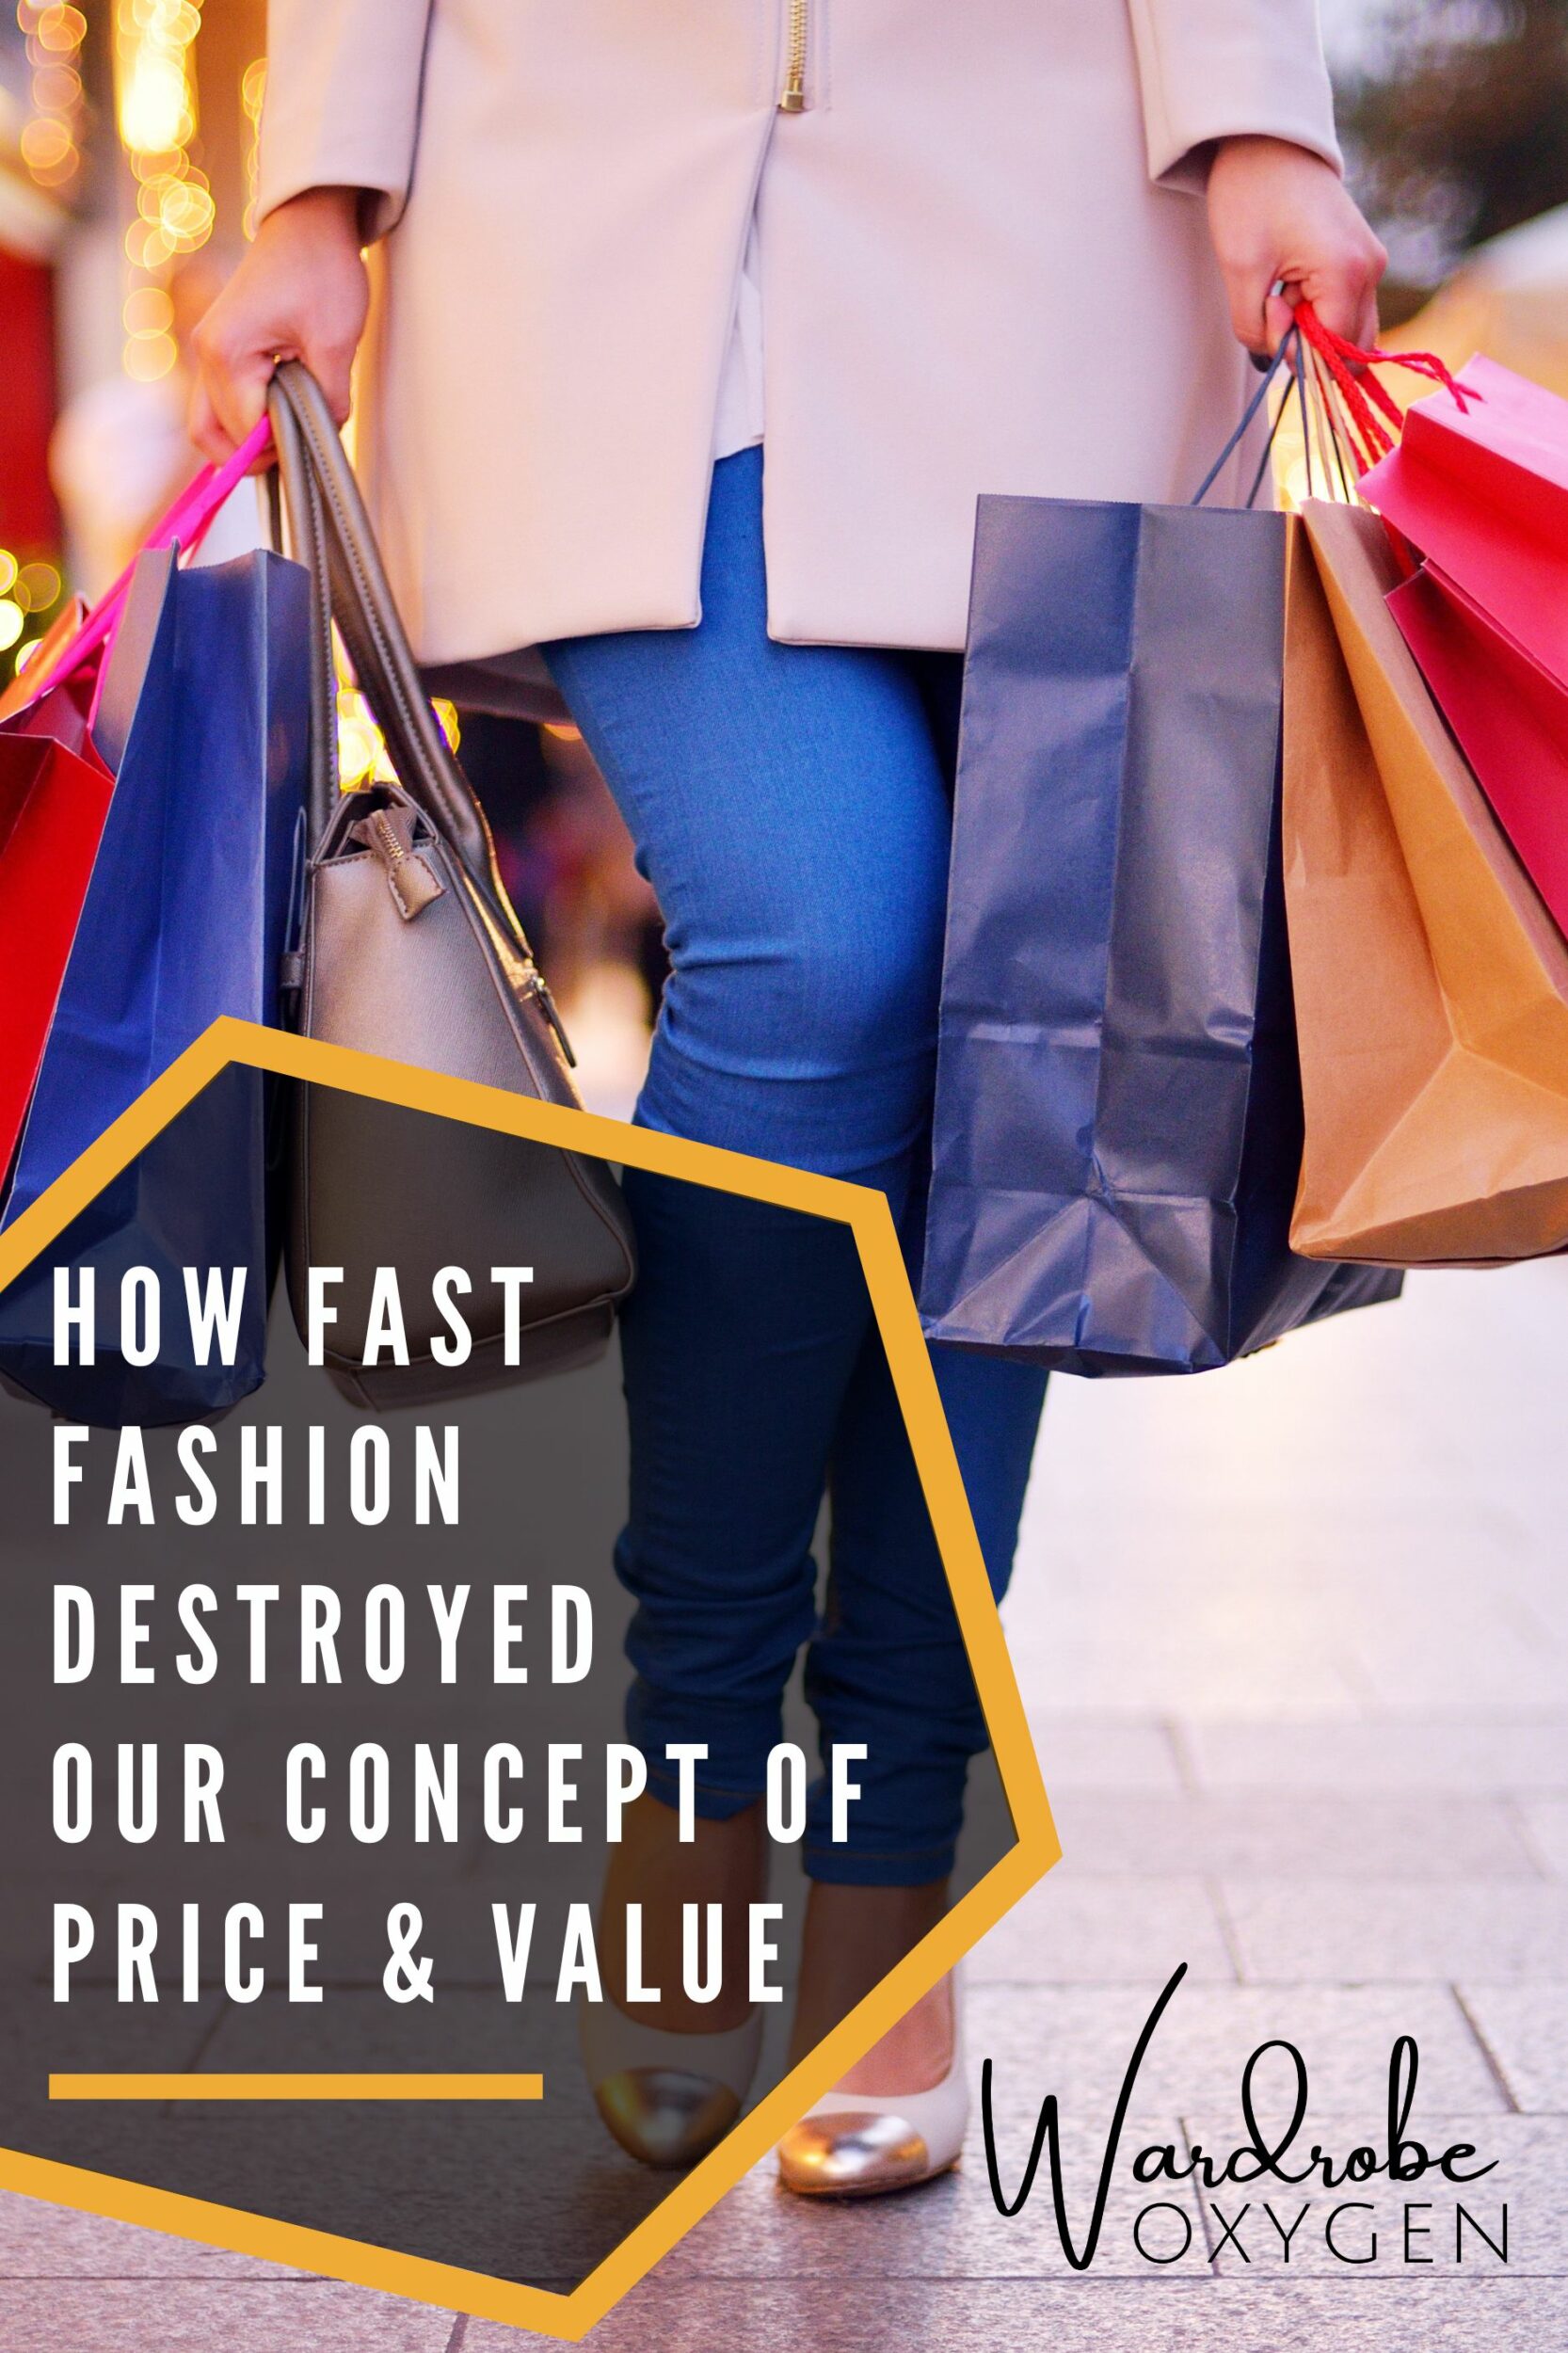 Fast Fashion Destroyed Our Concept of Price and Value